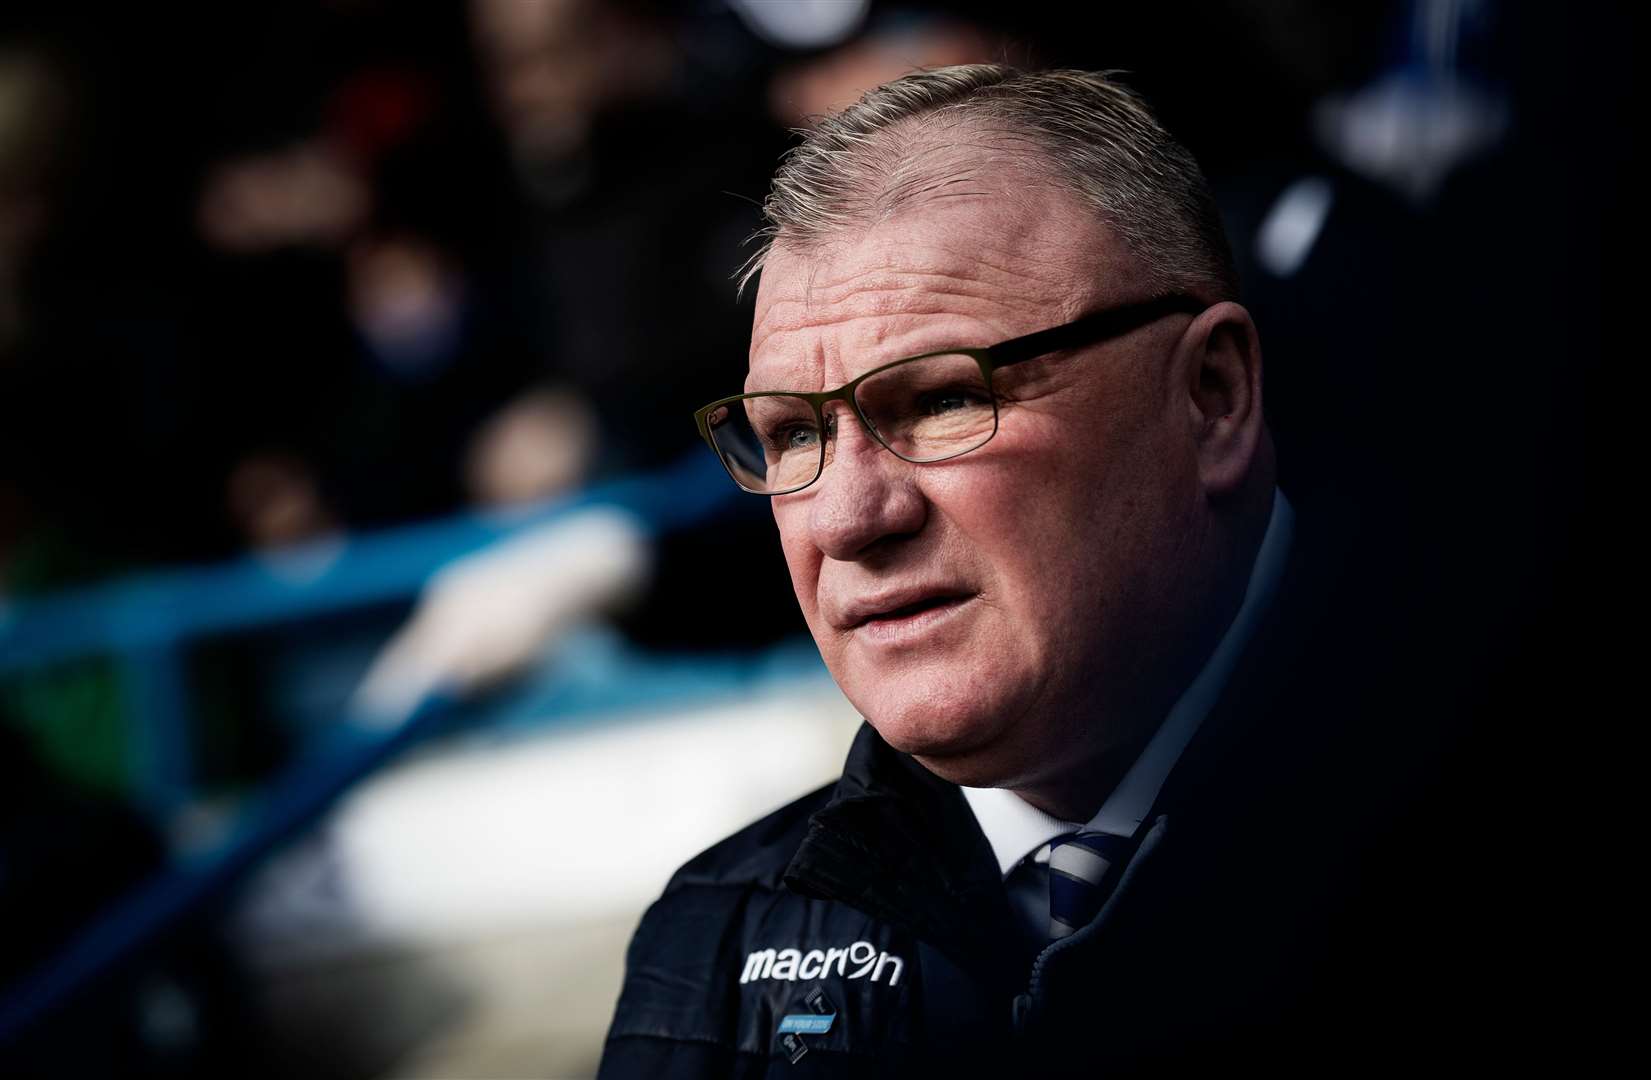 Gillingham manager Steve Evans missed Tuesday's match with illness